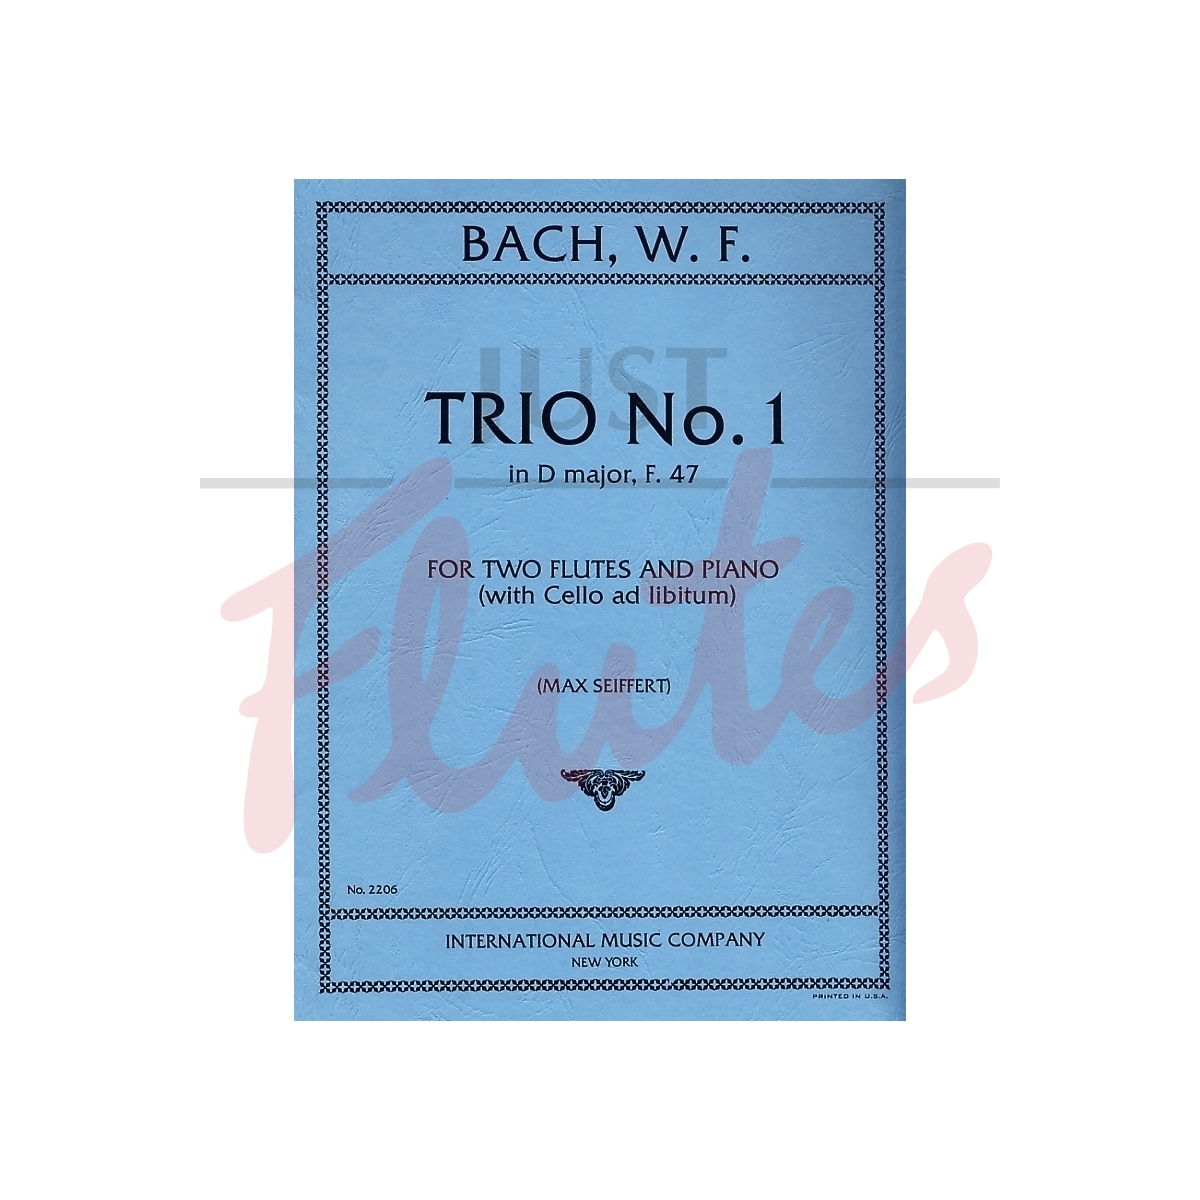 Trio No 1 in D major for Two Flutes and Piano